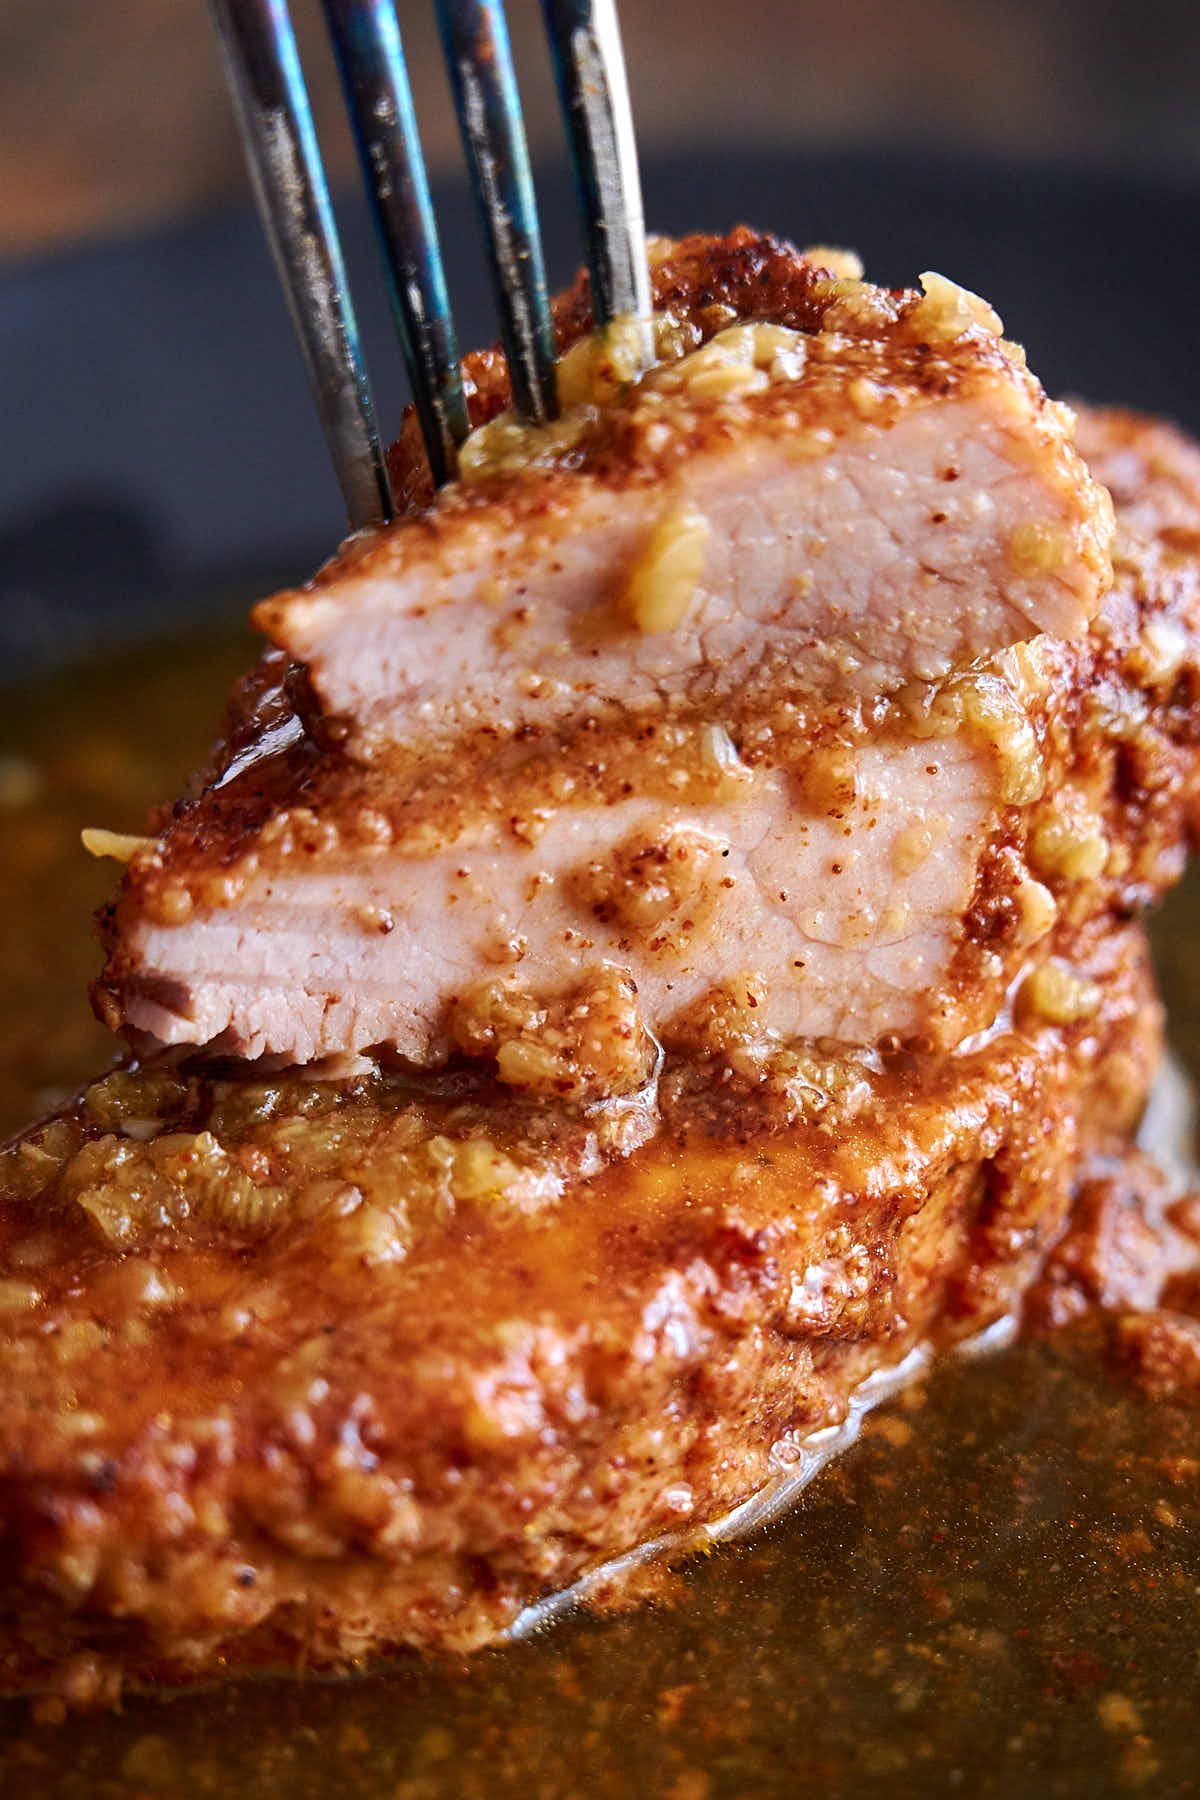 Boneless pork chops, cooked in Instant Pot, shown on a plate, cut in half, juicy, with amber honey garlic sauce on the plate.